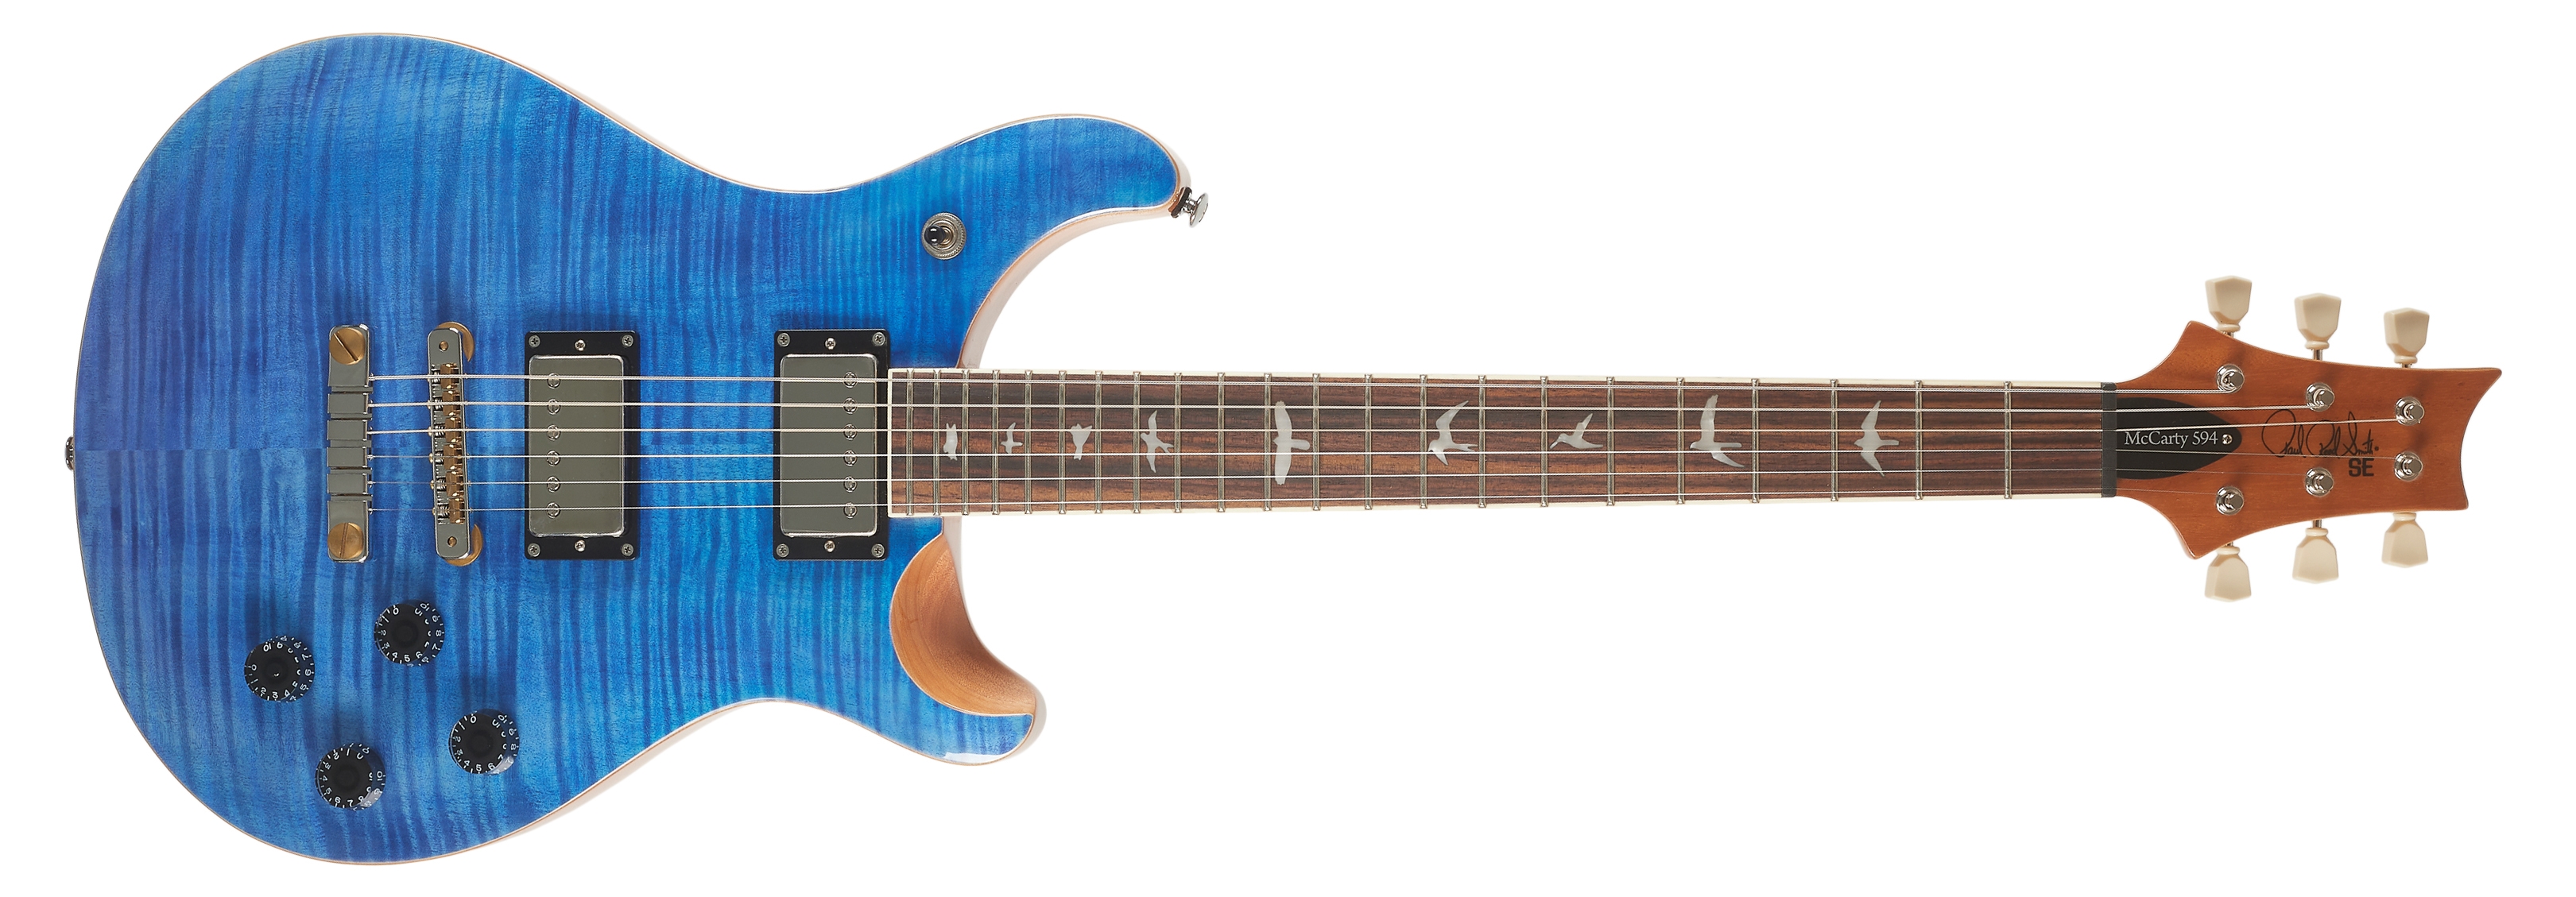 PRS SE Mccarty 594 Faded Blue